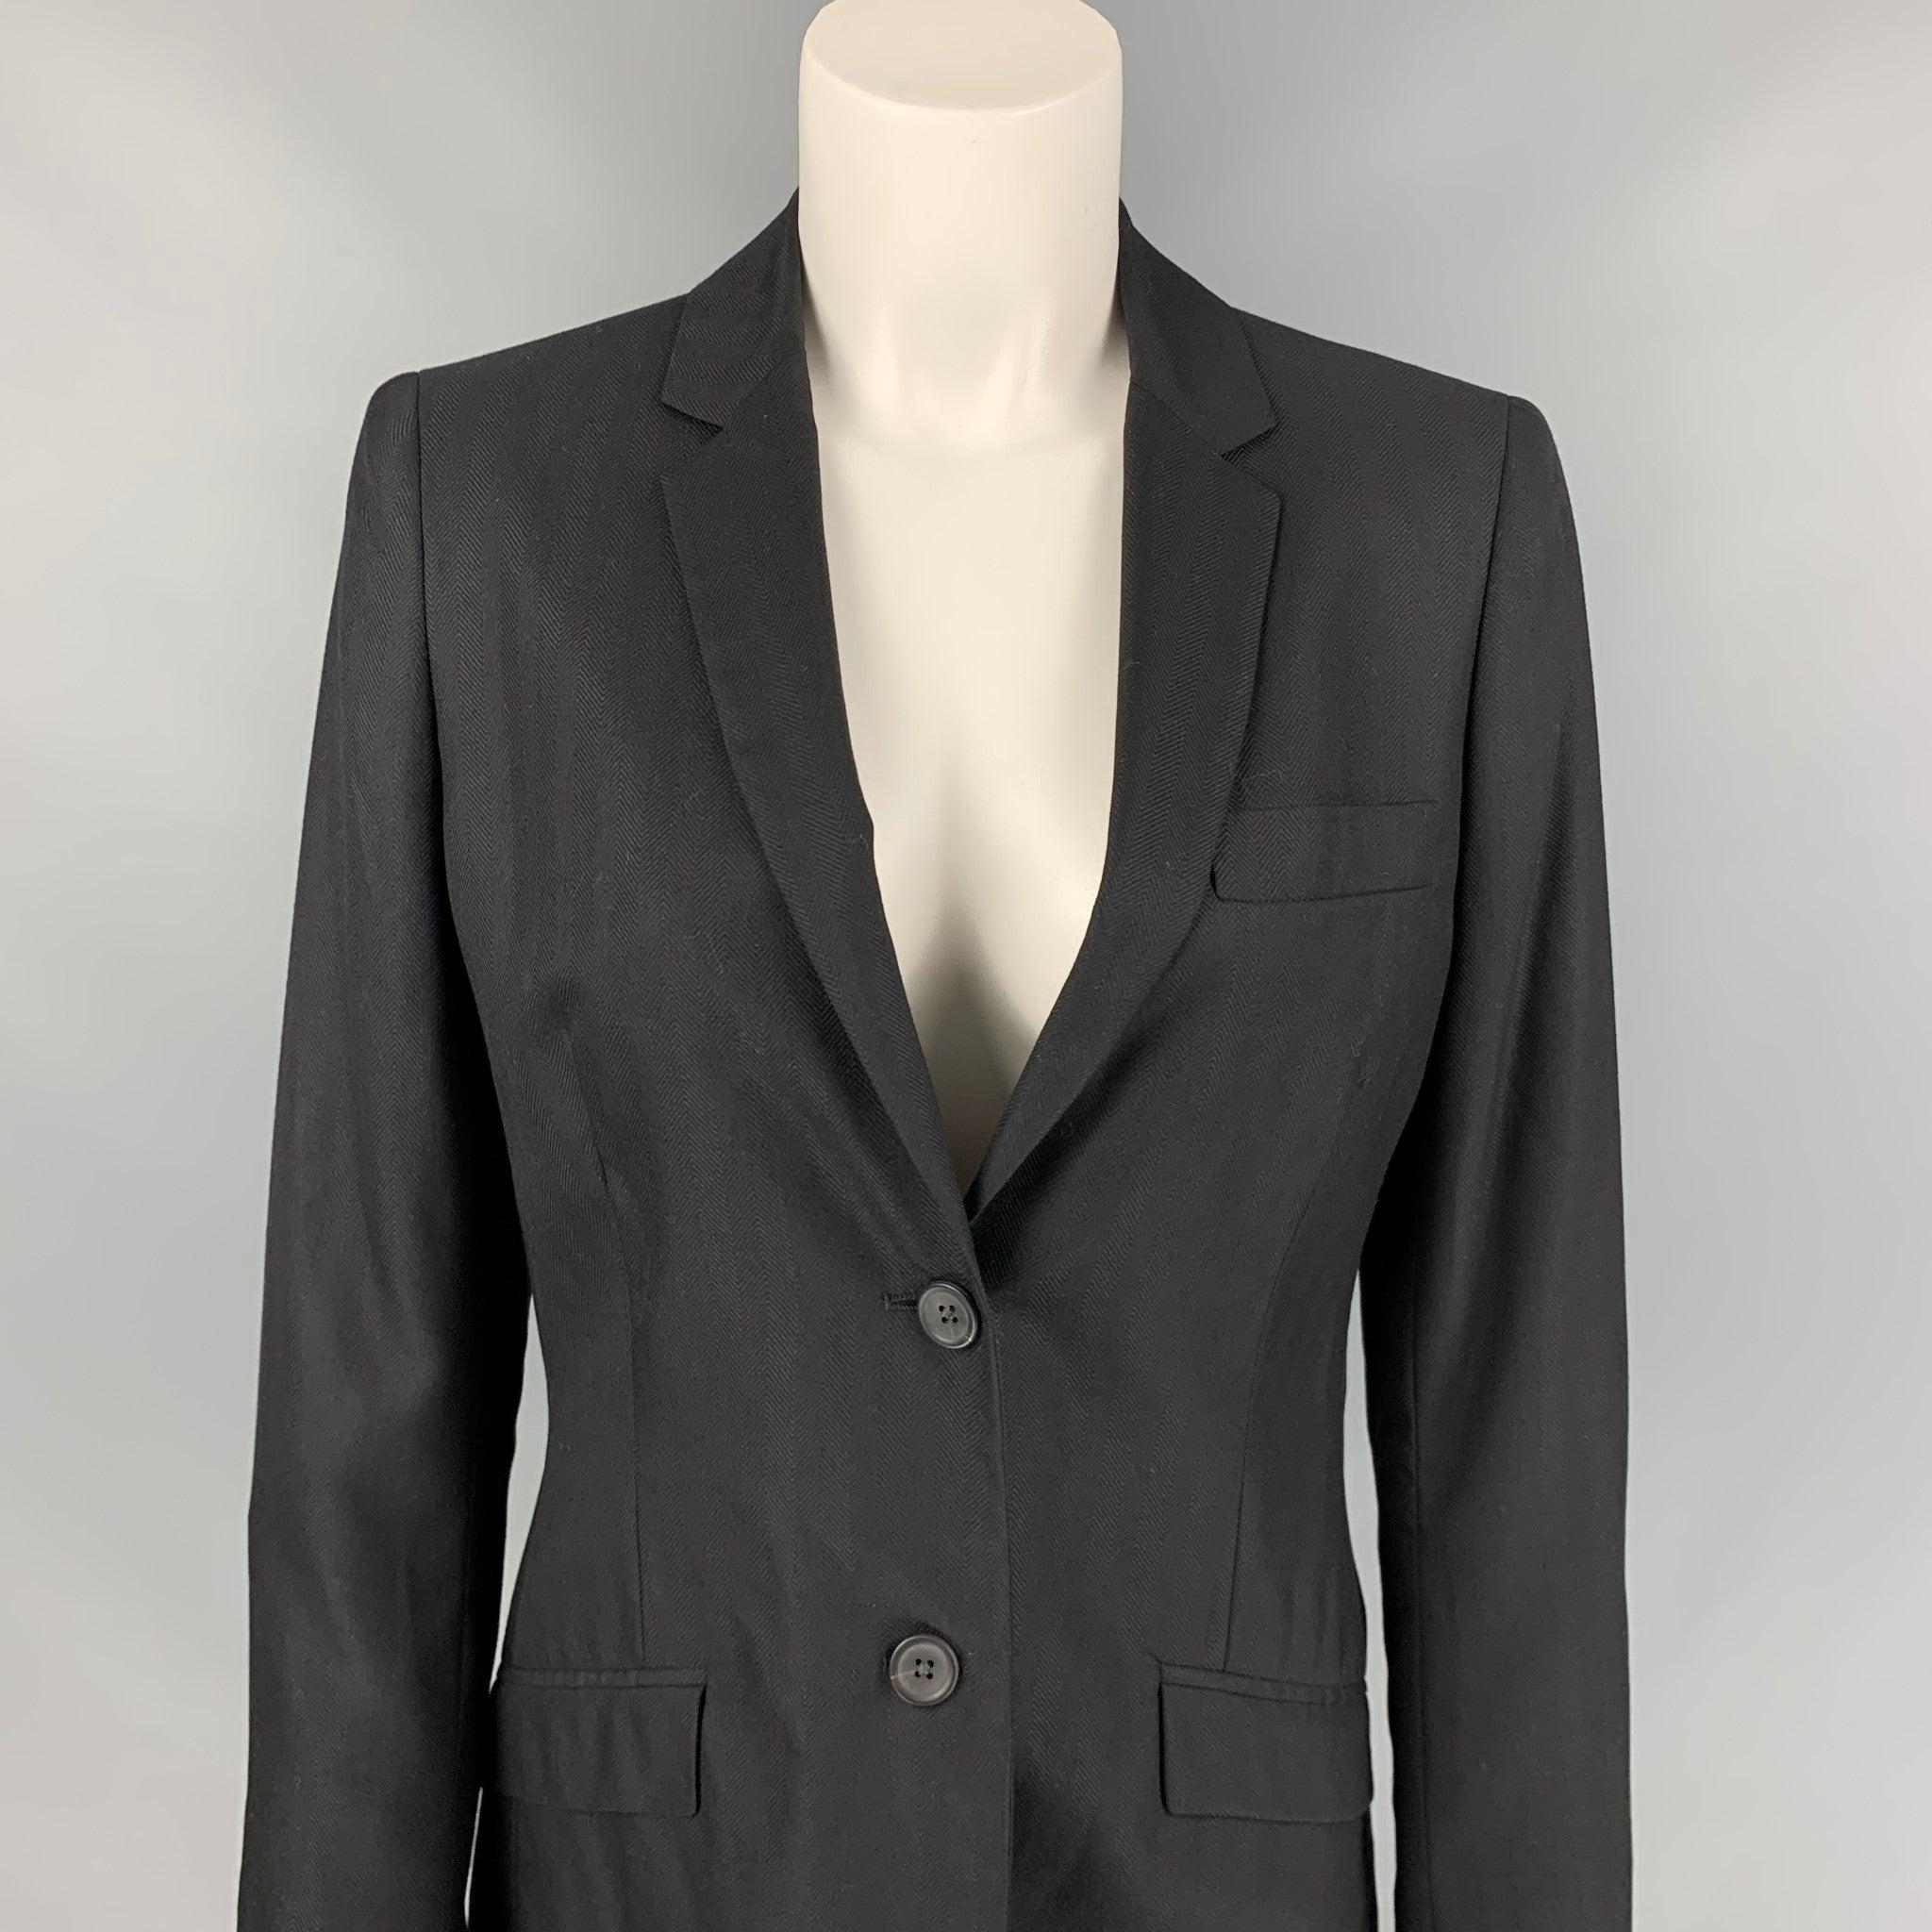 CALVIN KLEIN COLLECTION jacket blazer comes in a black cashmere / silk with a full liner featuring a notch lapel, flap pockets, and a double button closure. Made in Italy.
Very Good
Pre-Owned Condition. 

Marked:   6/42 

Measurements: 
 
Shoulder: